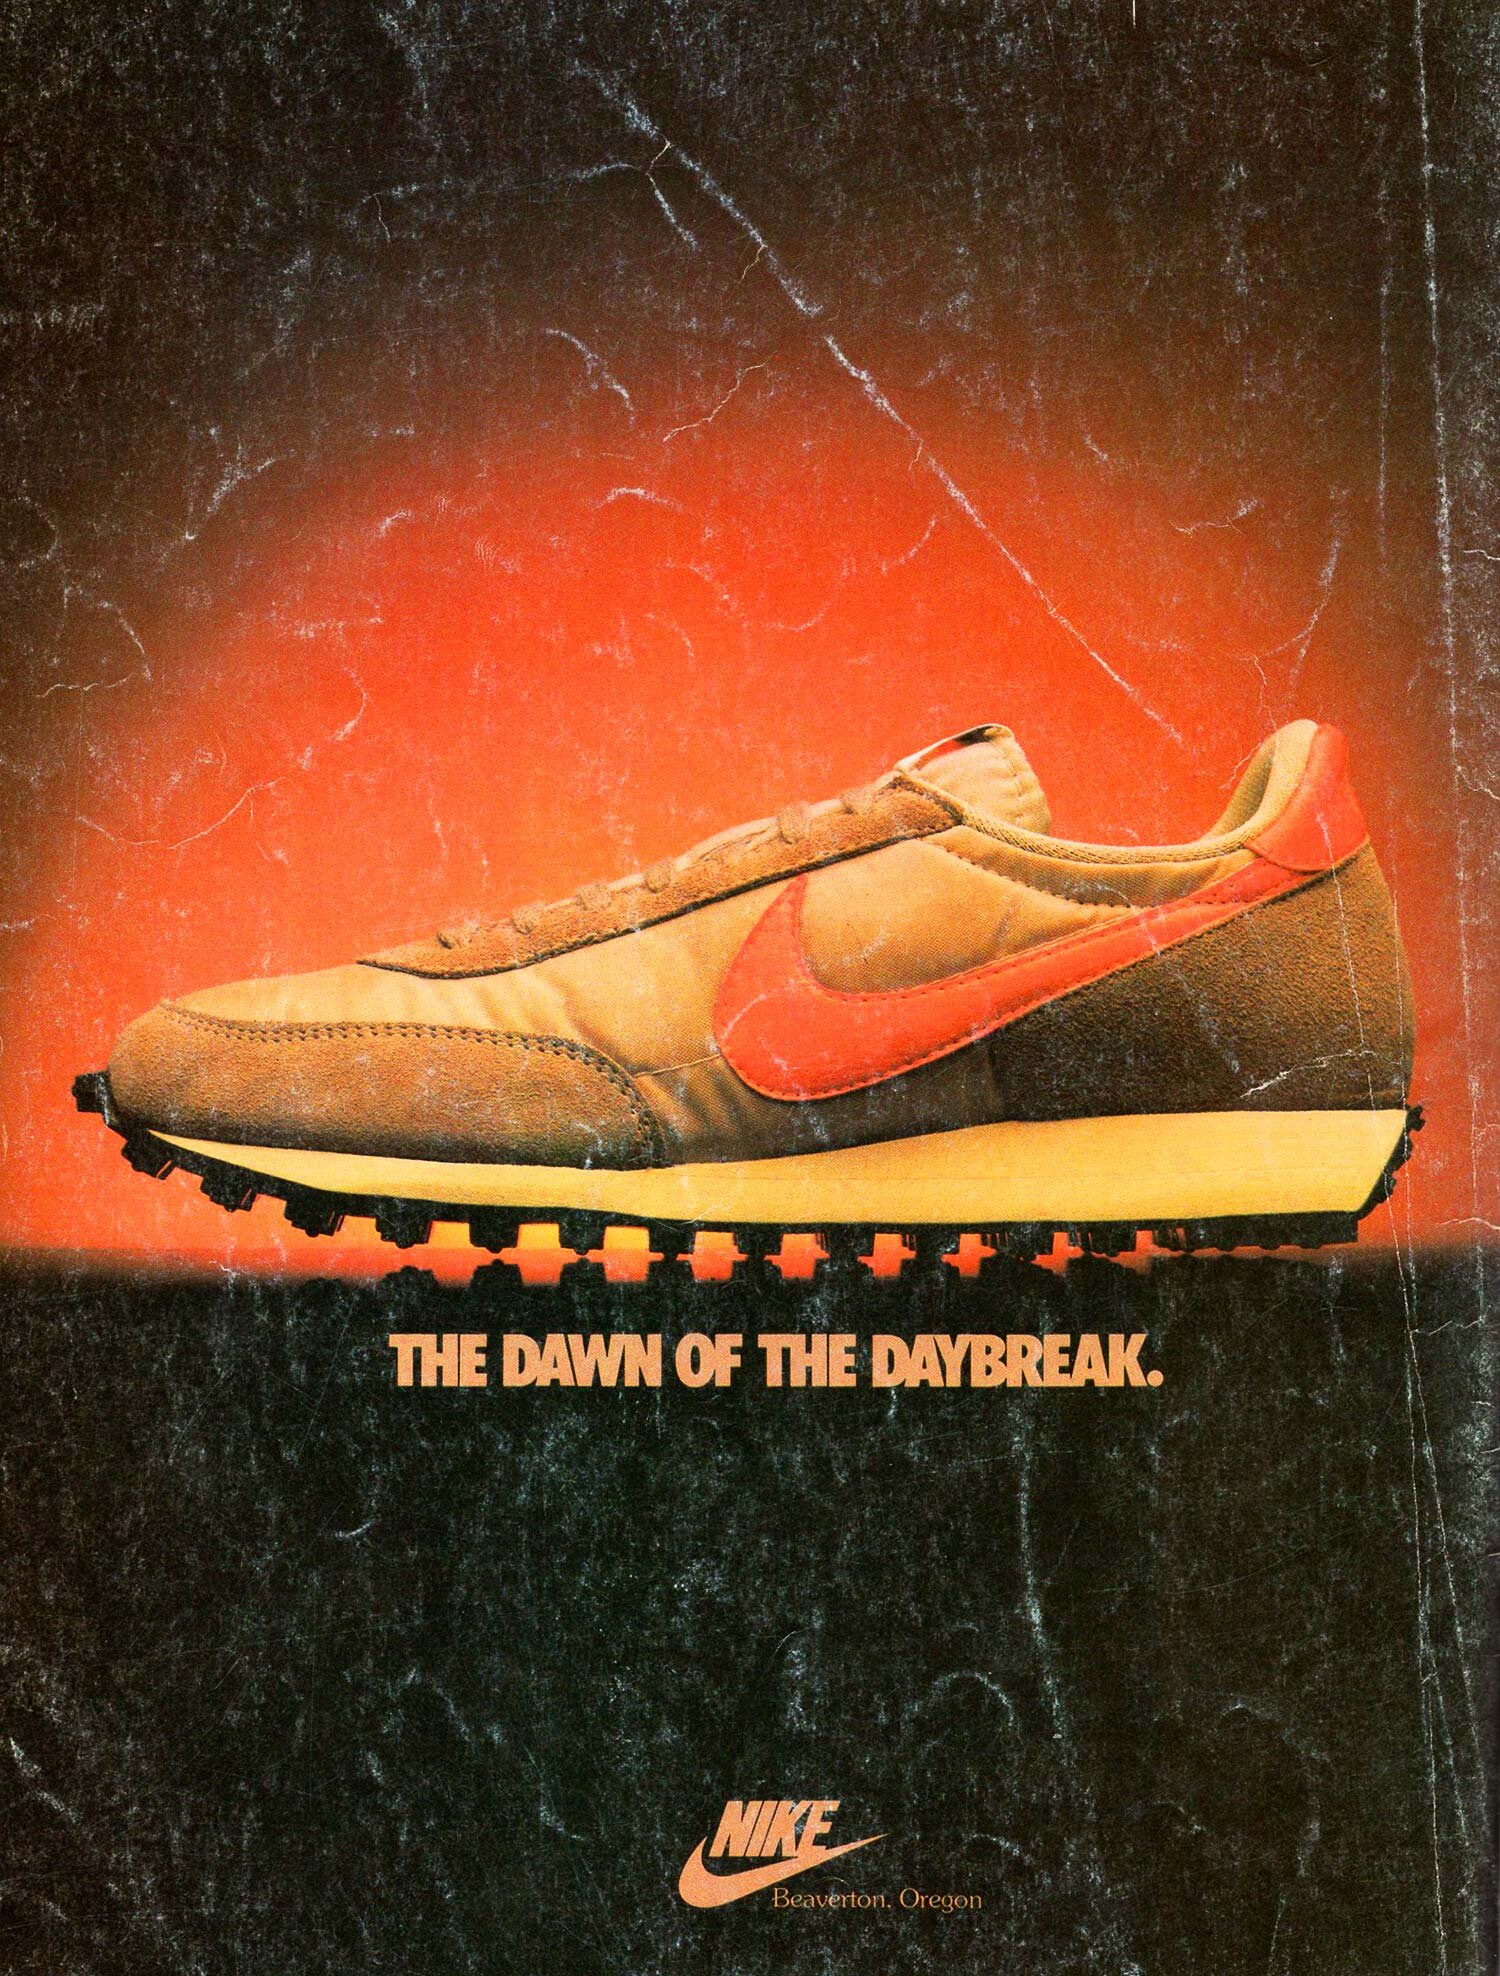 vintage Nike ad — The A vintage and retro sneaker — Vintage